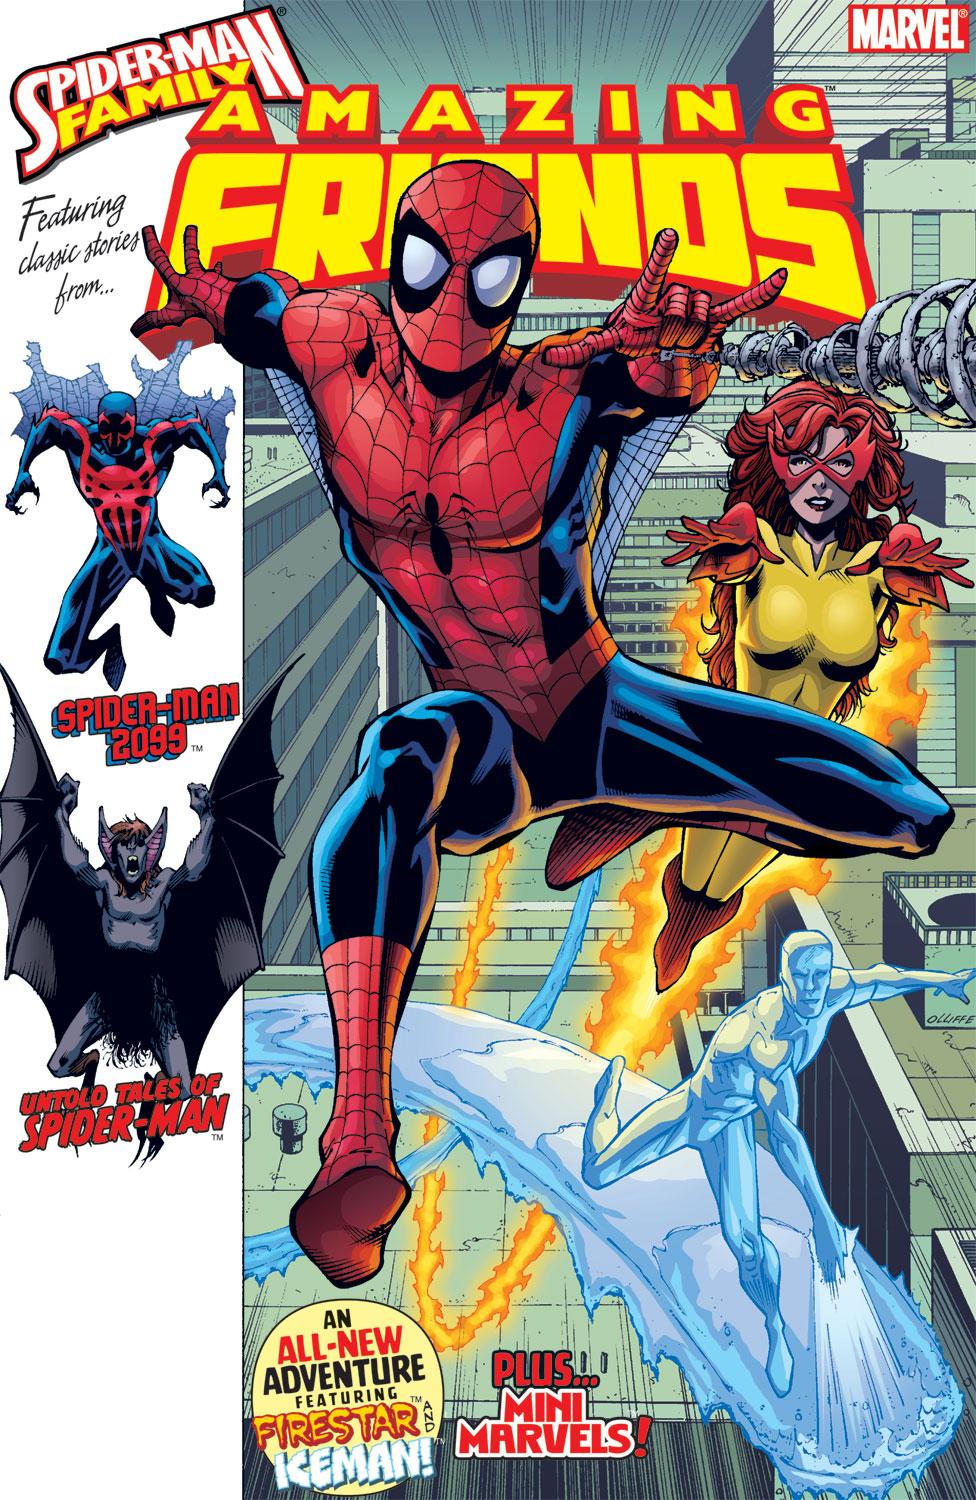 Spider-Man Family Featuring Spider-Man's Amazing Friends (2006) #1